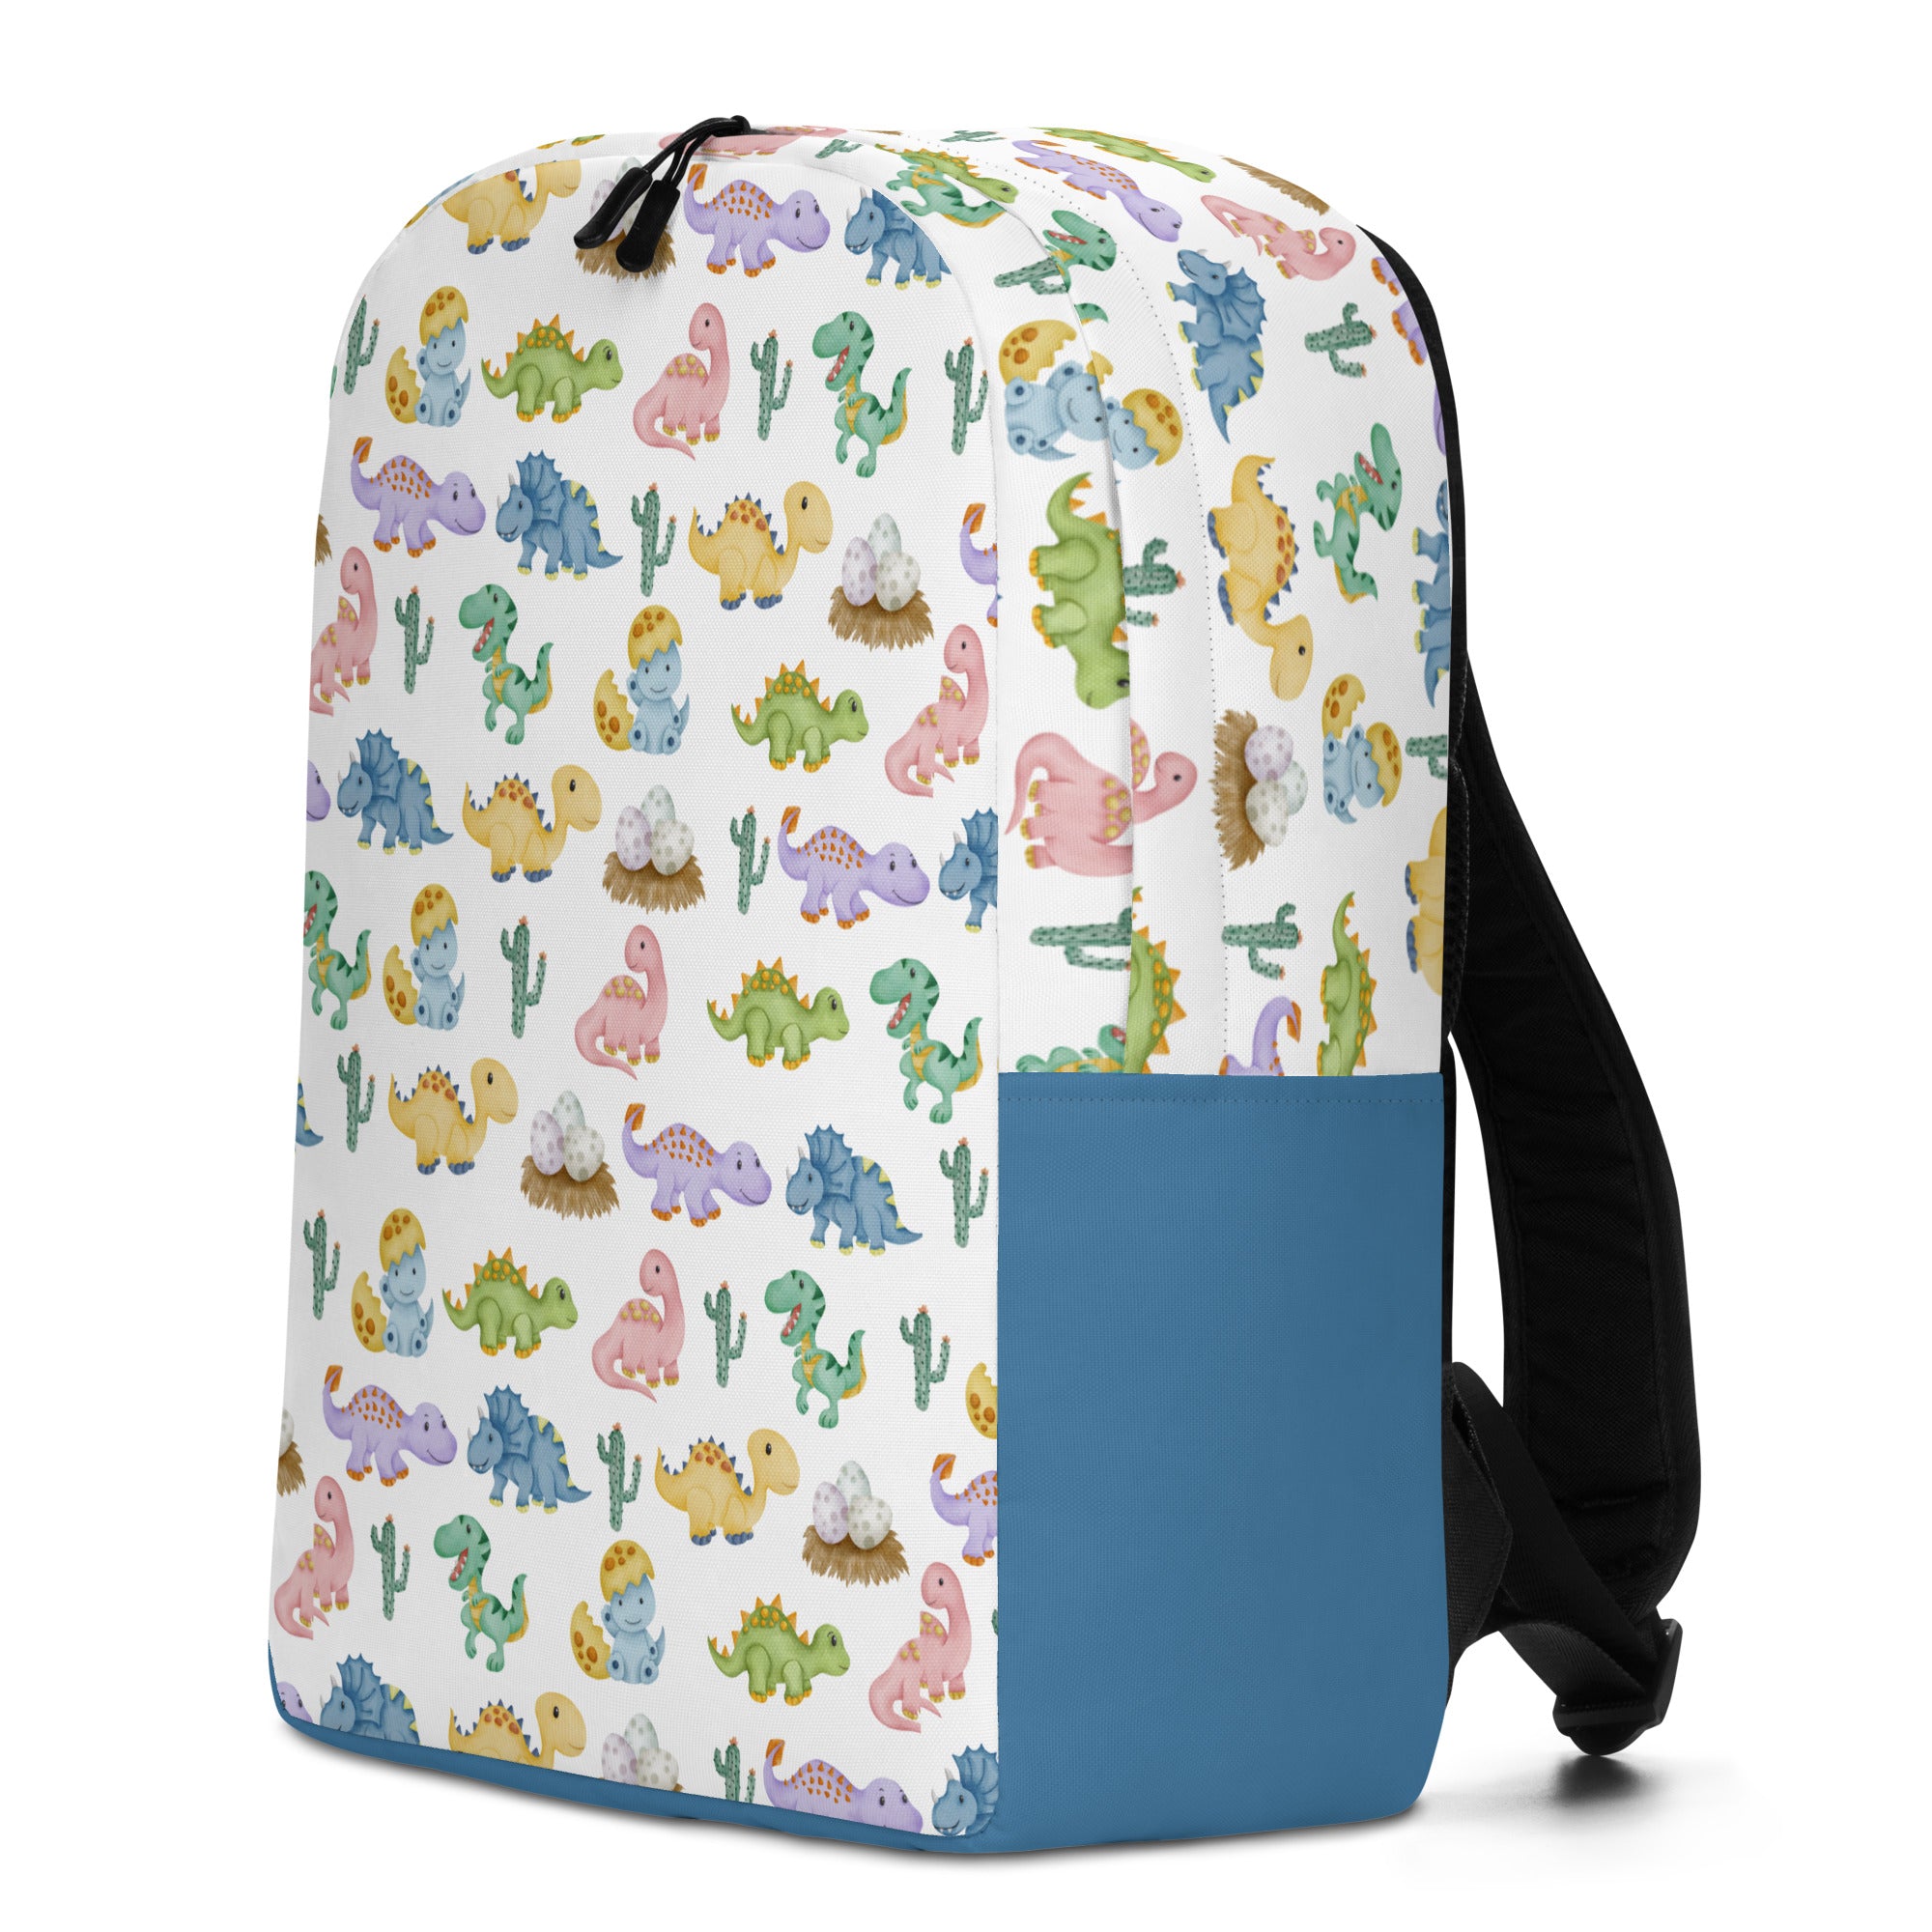 Kids backpack with cute dinos